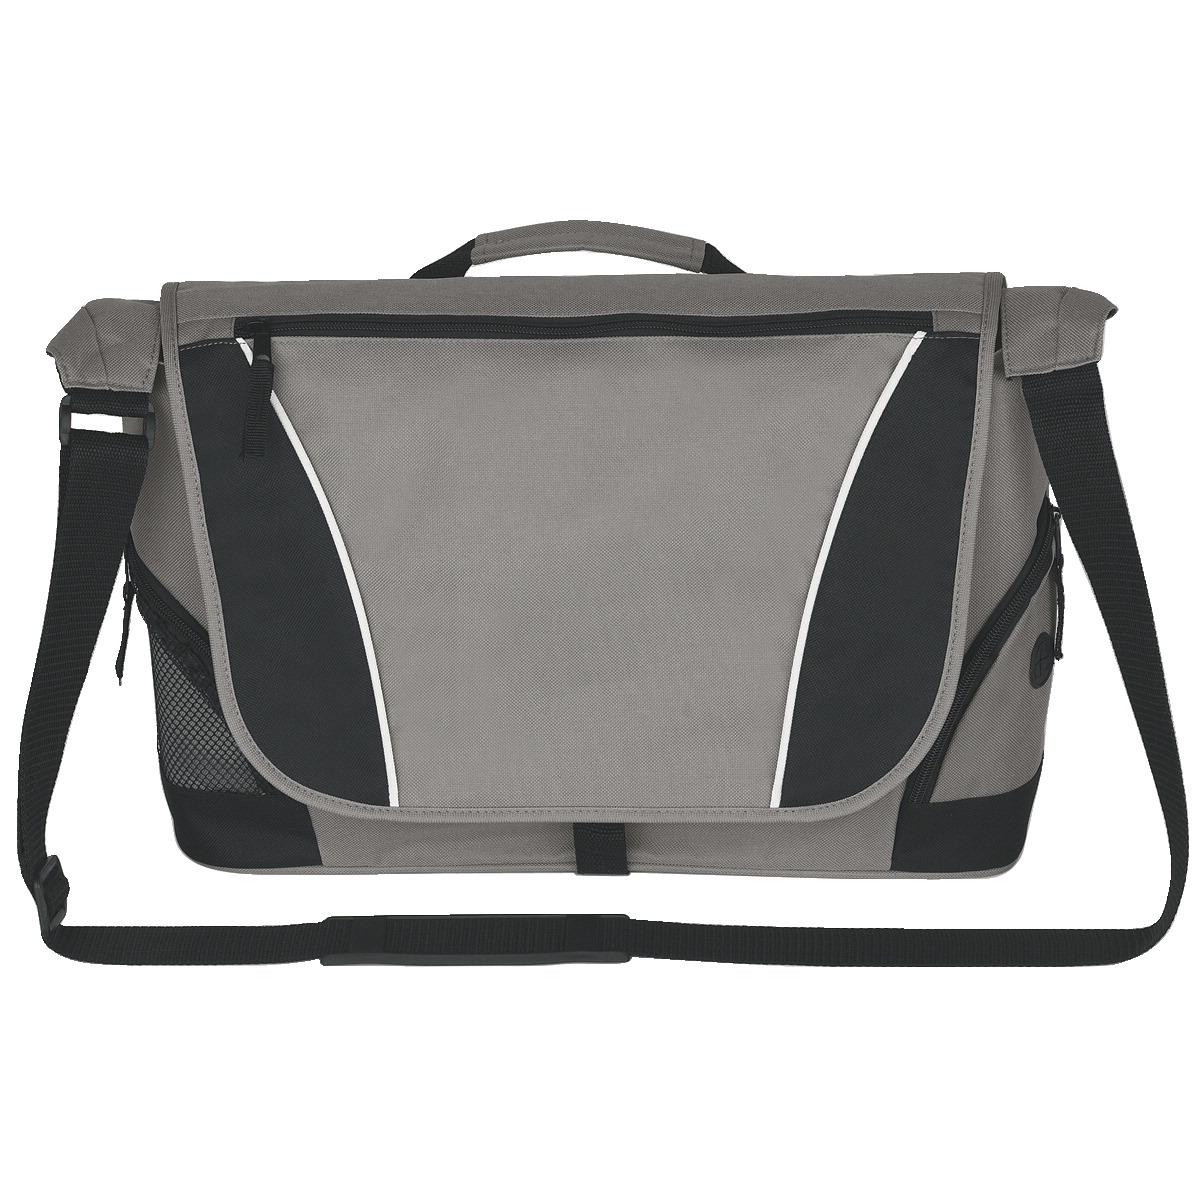 20 X 12 In. Messenger Bag, Polyester - Gray With Black